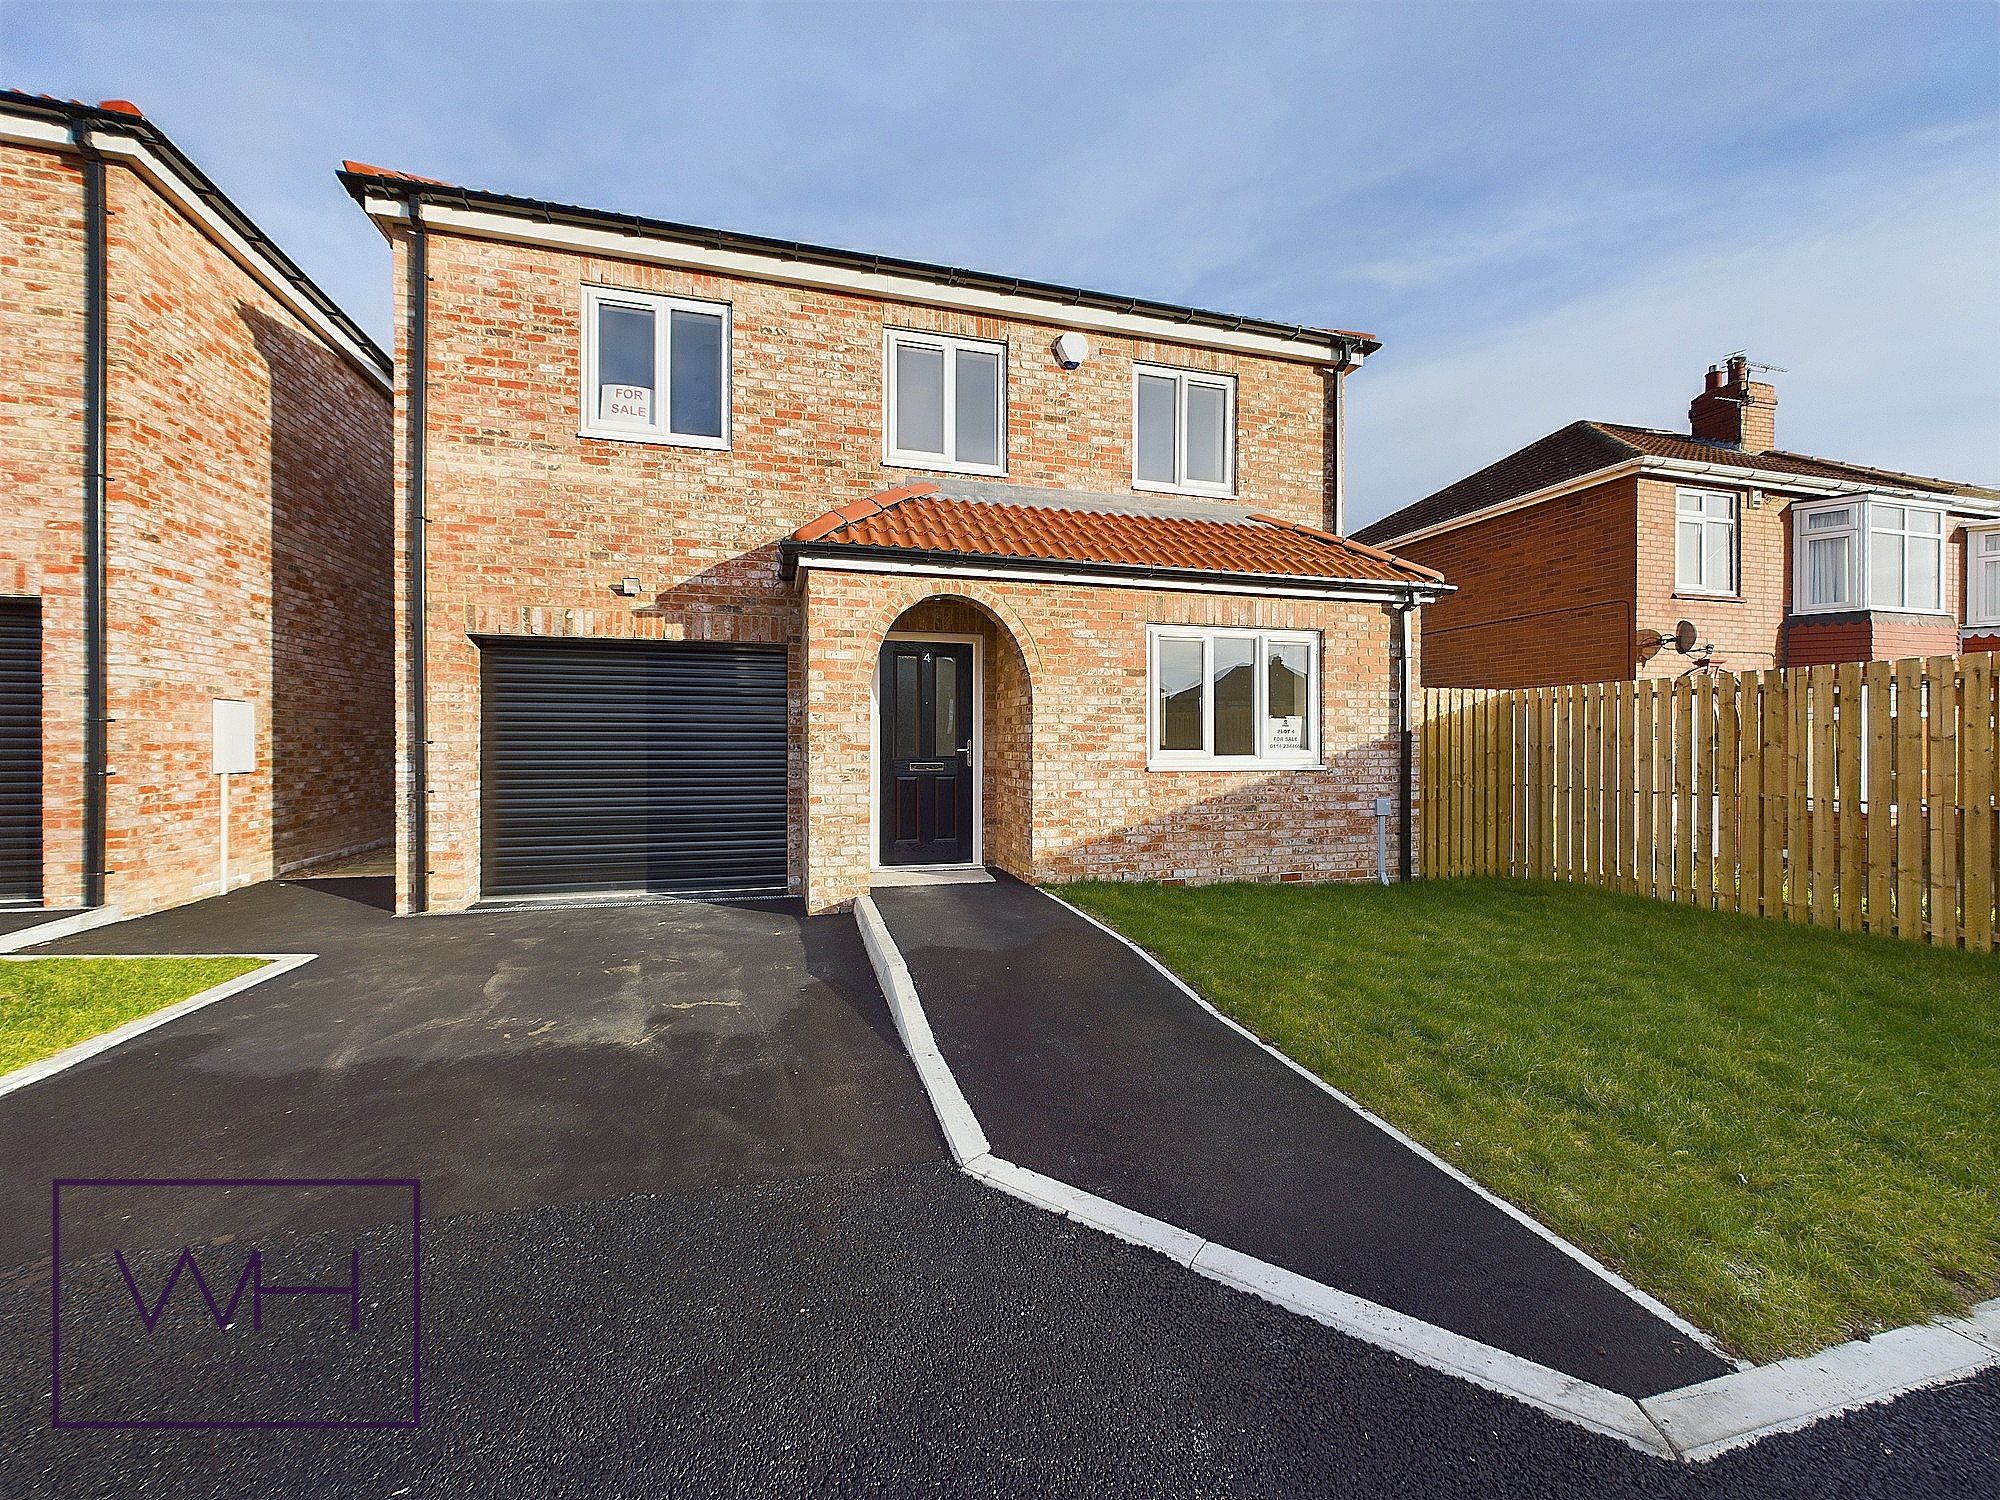 Odessa Drive, Scawsby, Doncaster, DN5 8RB